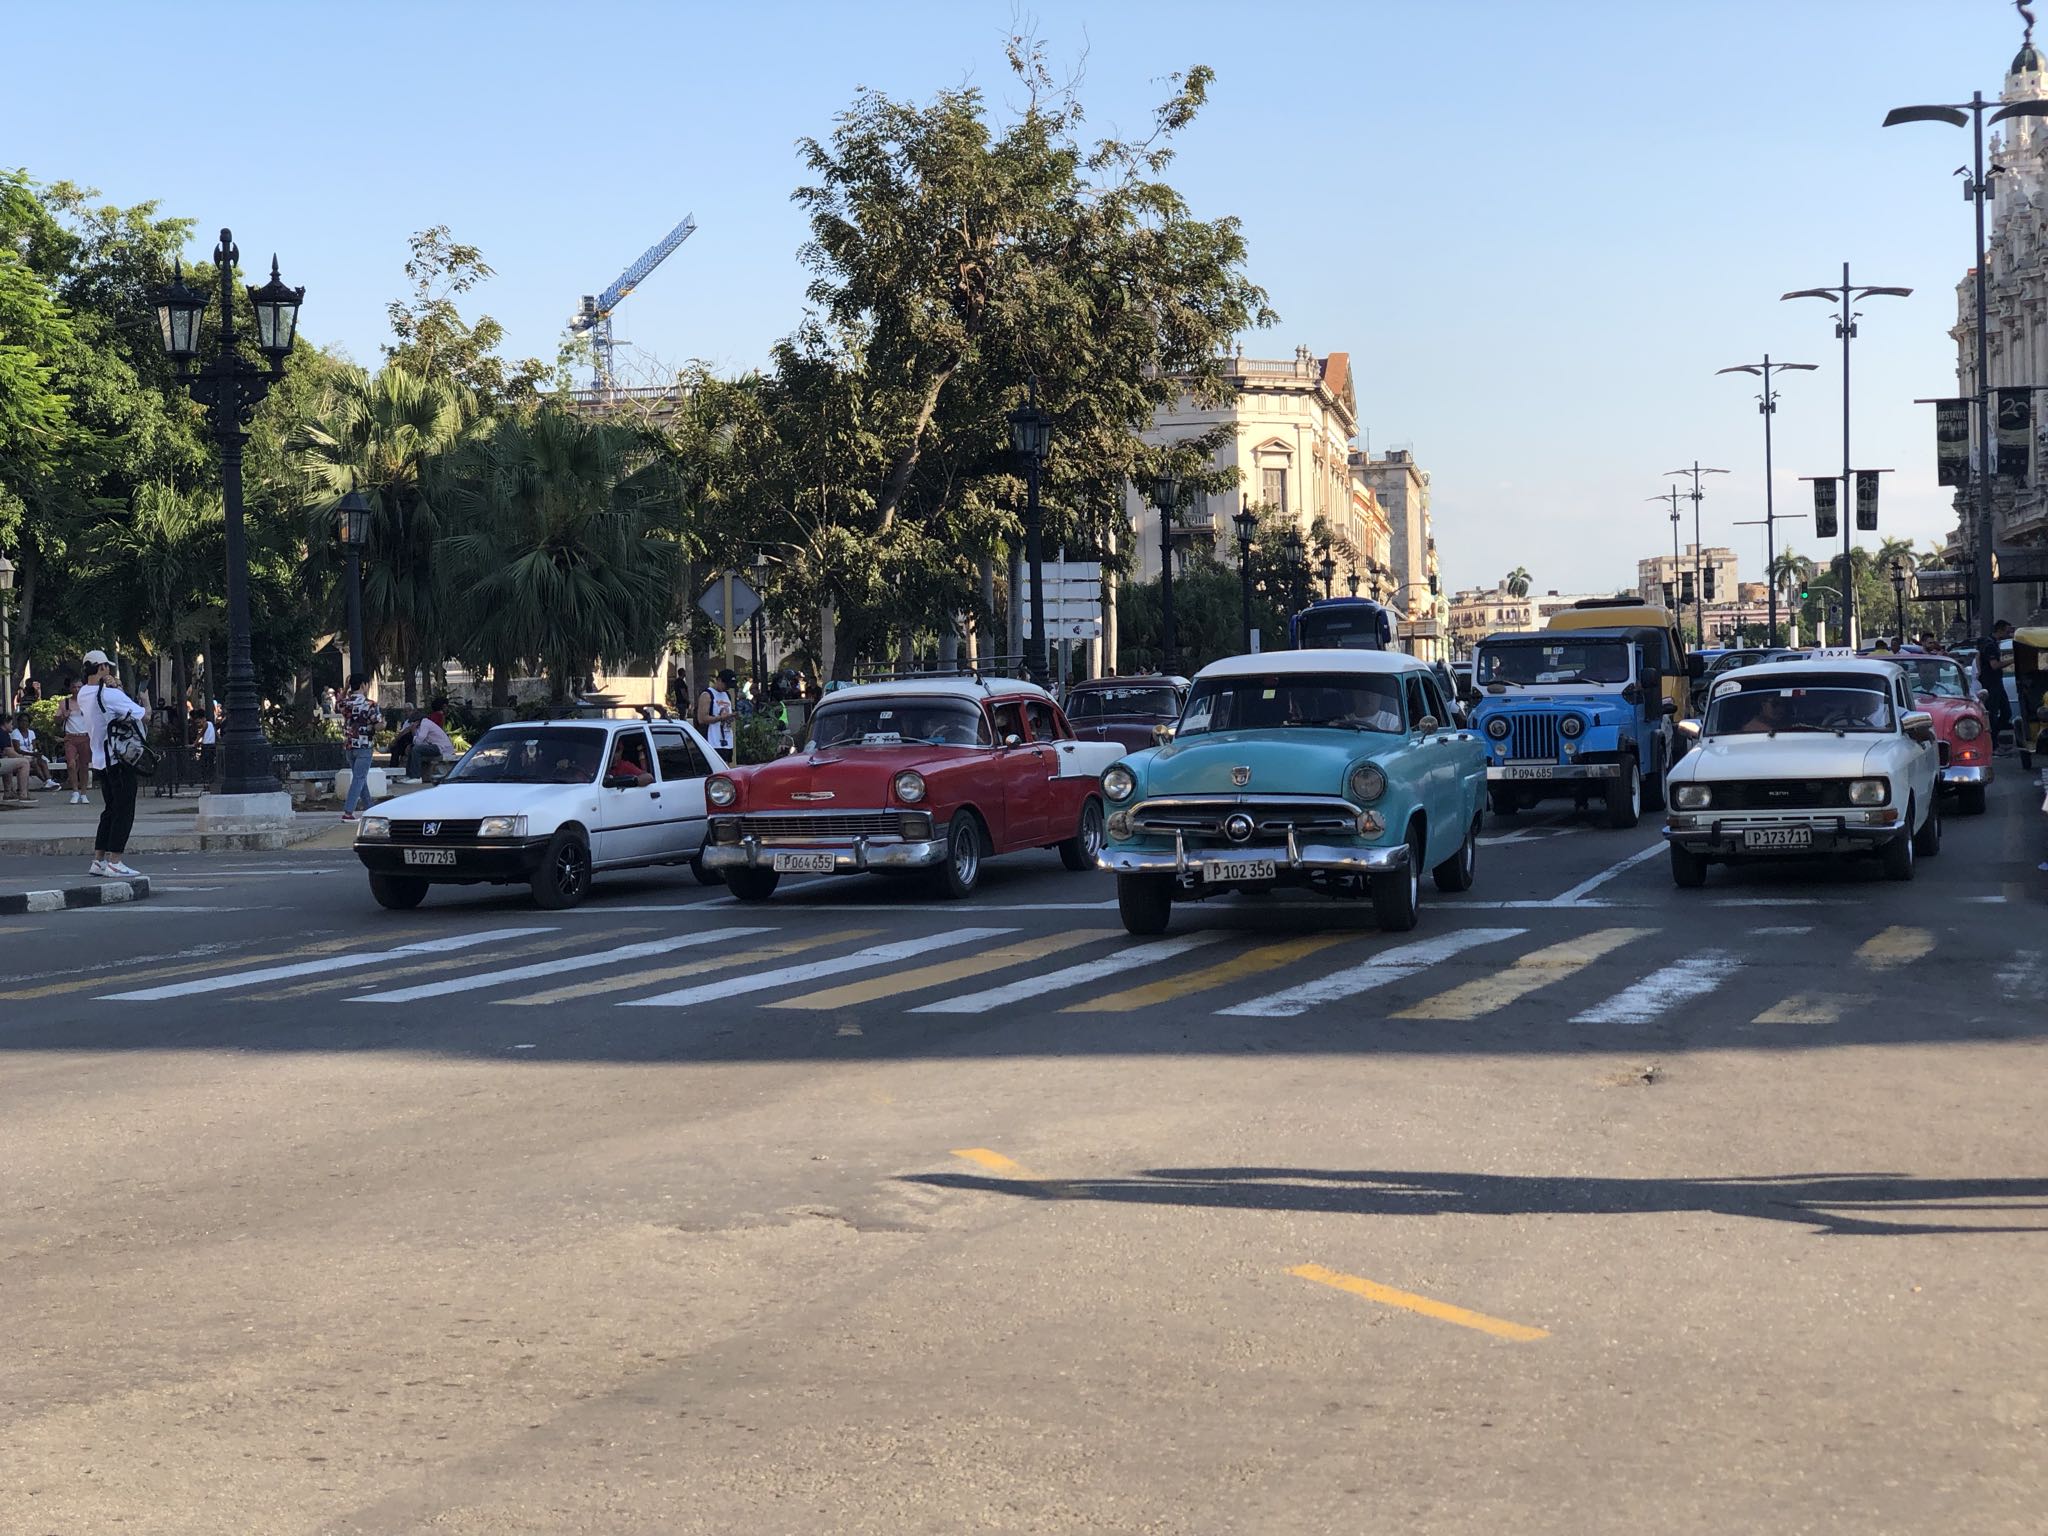 Photo 20 of 221 from the album Highlights Cuba 2019.